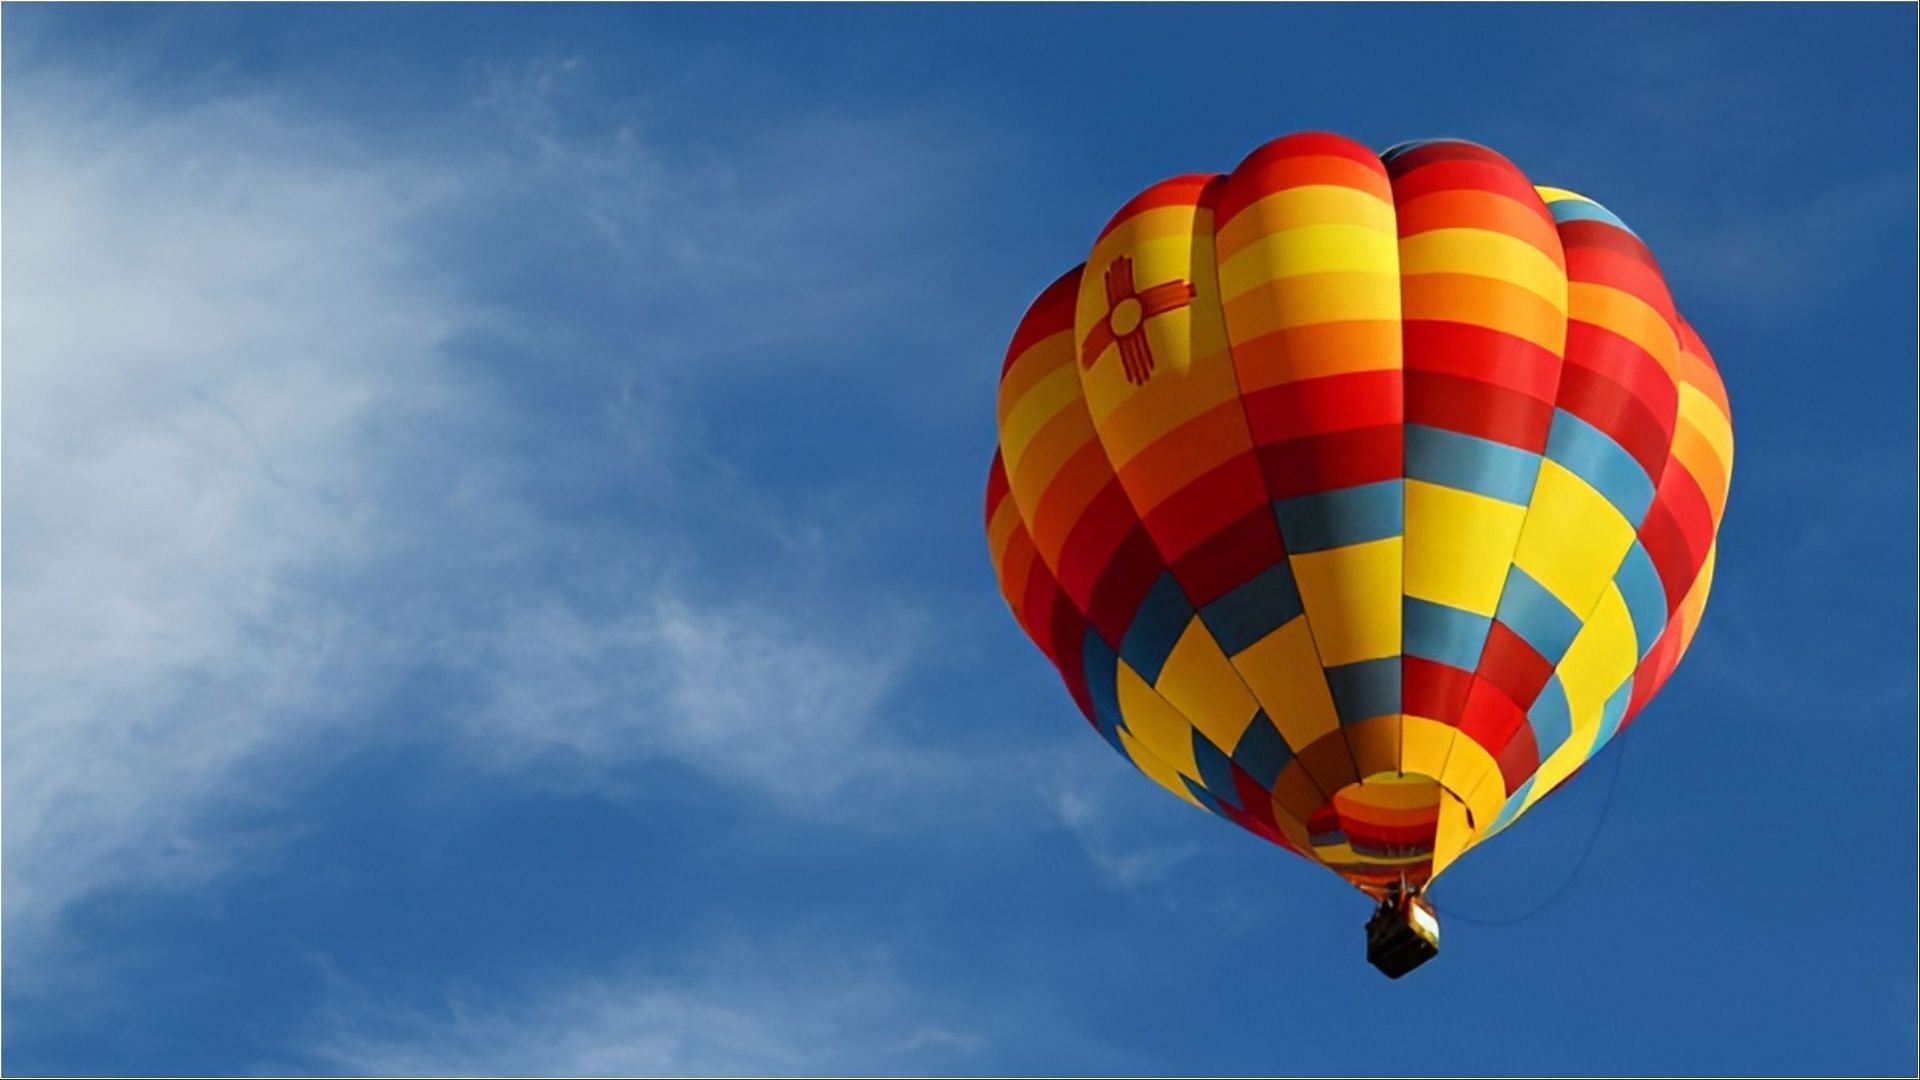 A hot air balloon with five passengers crashed on Sunday leading to the death of four people (Image via MesicNenad/X)